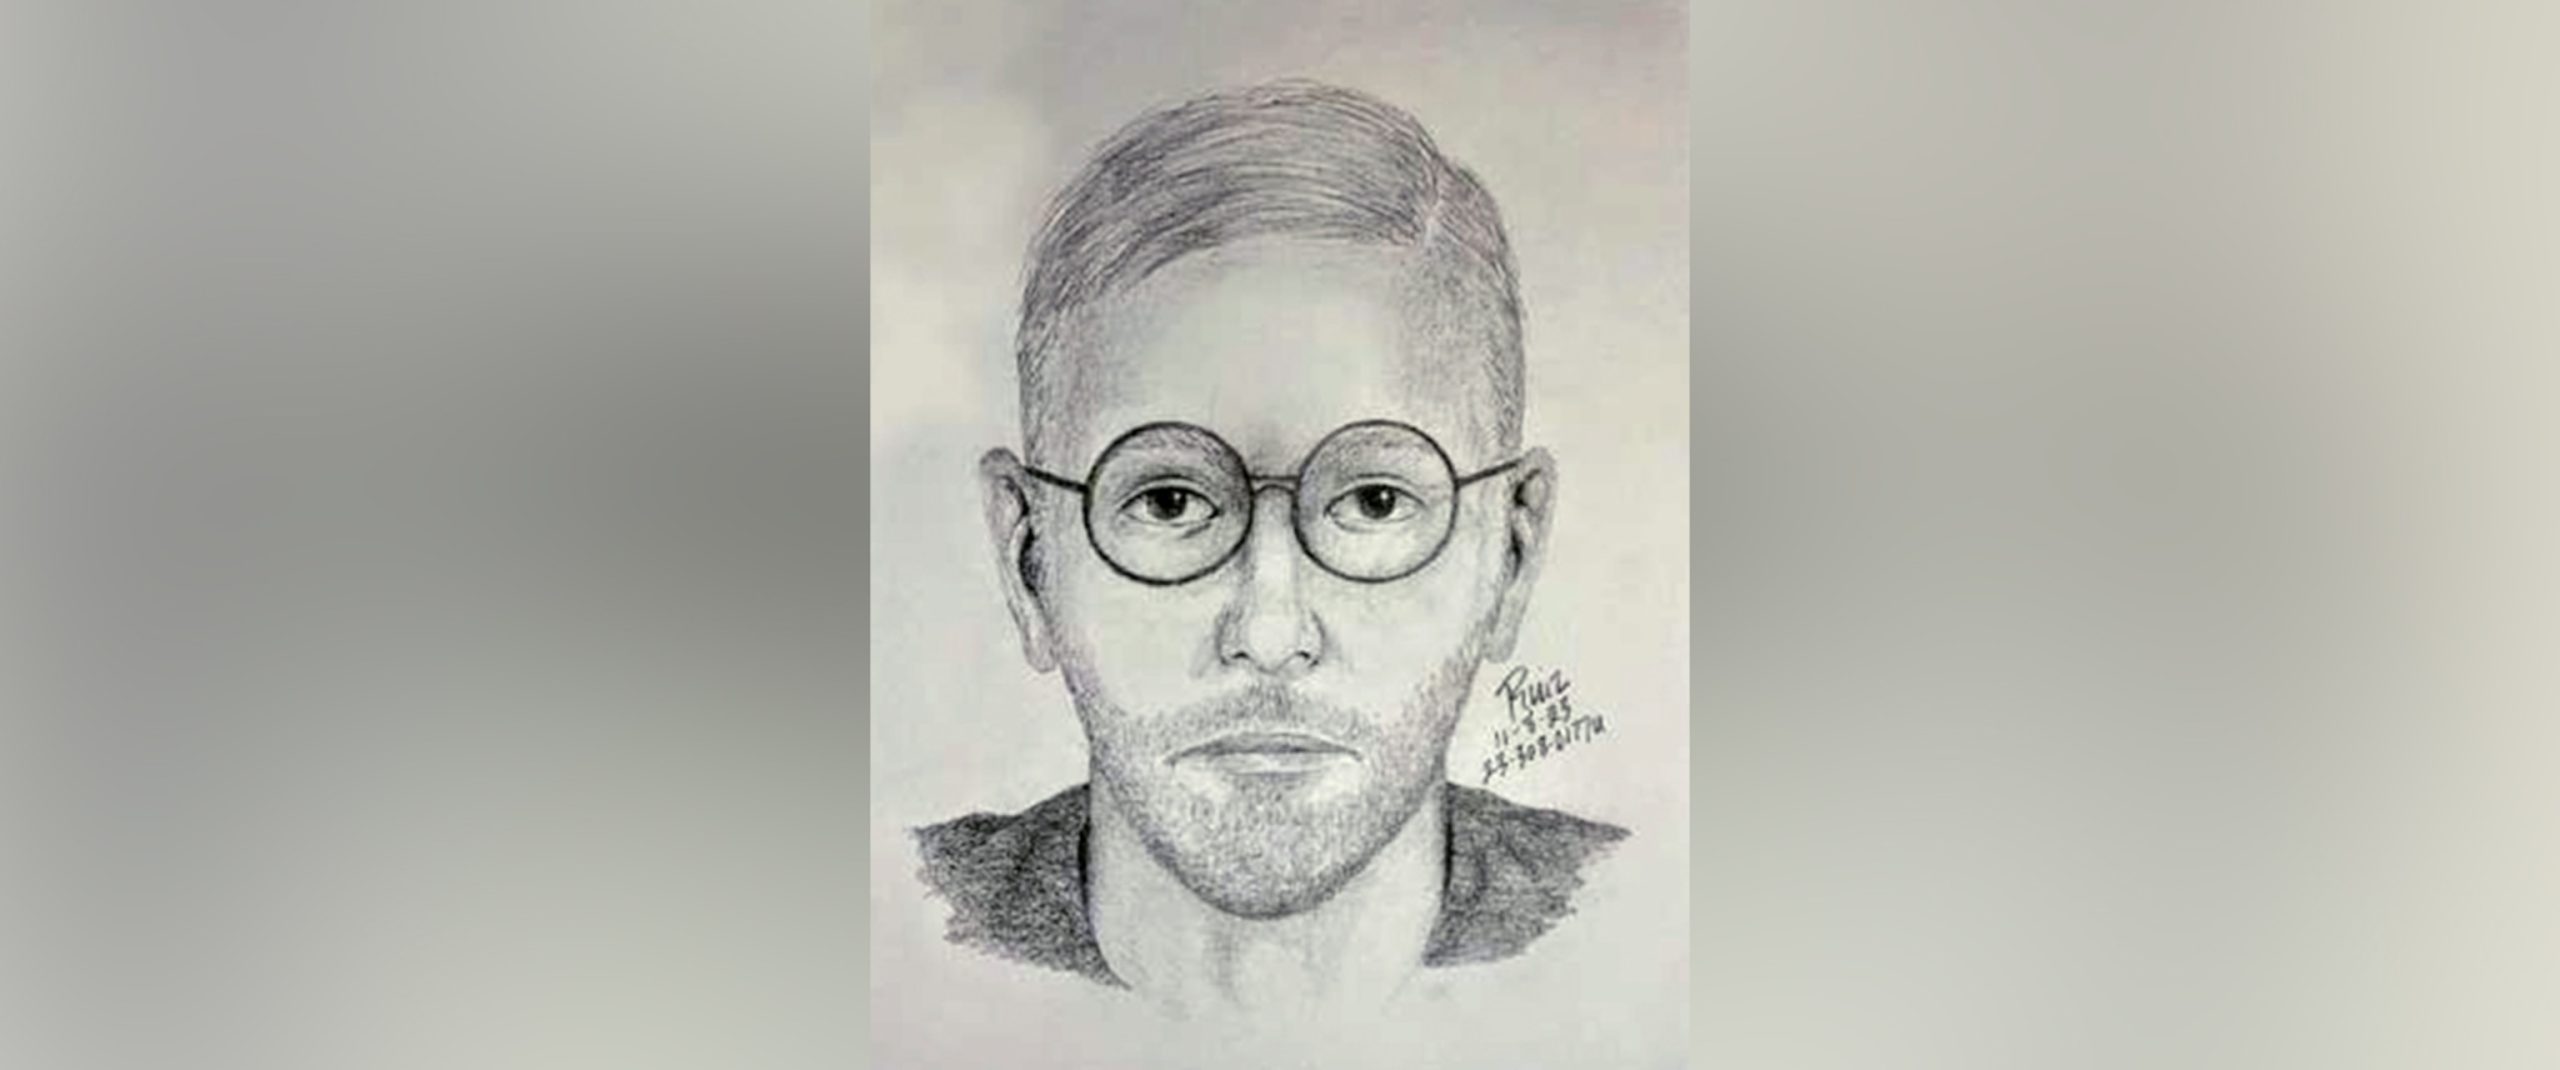 Police release sketch of suspect wanted in alleged hit-and-run hate crime at Stanford University